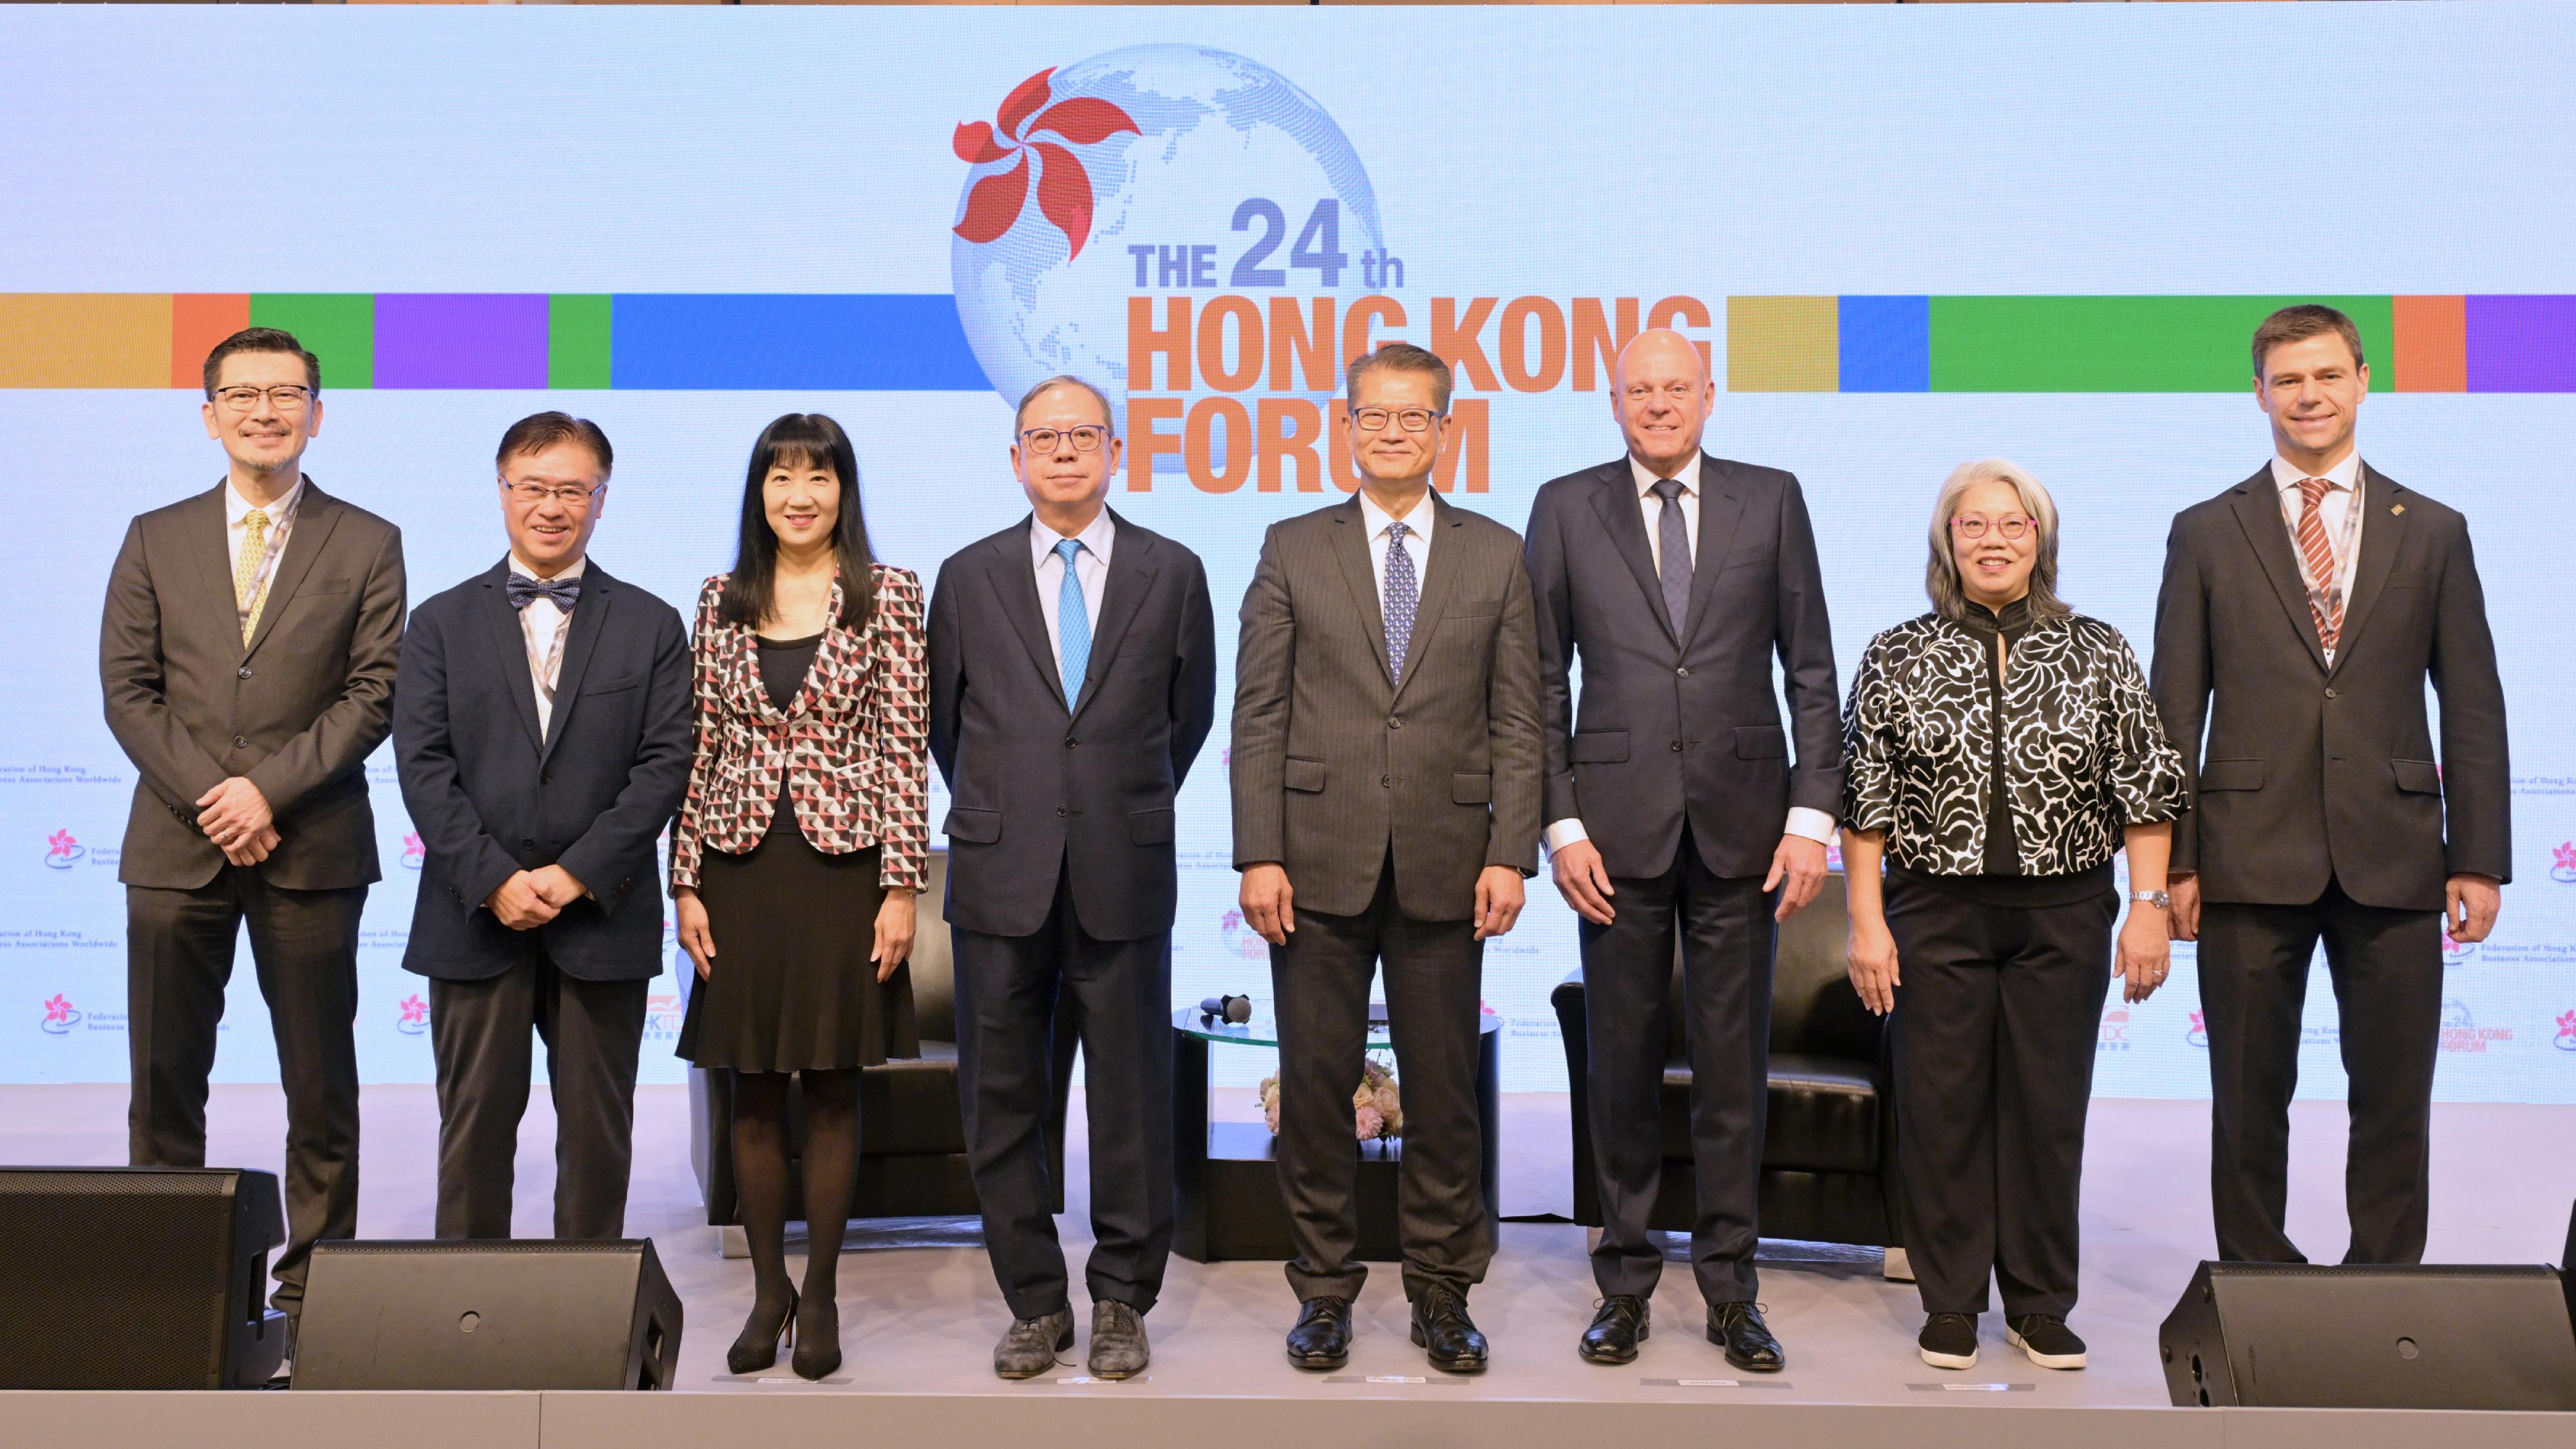 The Financial Secretary, Mr Paul Chan, attended the 24th Hong Kong Forum Keynote Luncheon today (December 6). Photo shows Mr Chan (fourth right); the Chairman of the Hong Kong Trade Development Council (HKTDC), Dr Peter Lam (fourth left); the Executive Director of the HKTDC, Ms Margaret Fong (third left); the Chairman of the Federation of Hong Kong Business Associations Worldwide, Mr Hans Poulis (third right), and other guests at the luncheon.